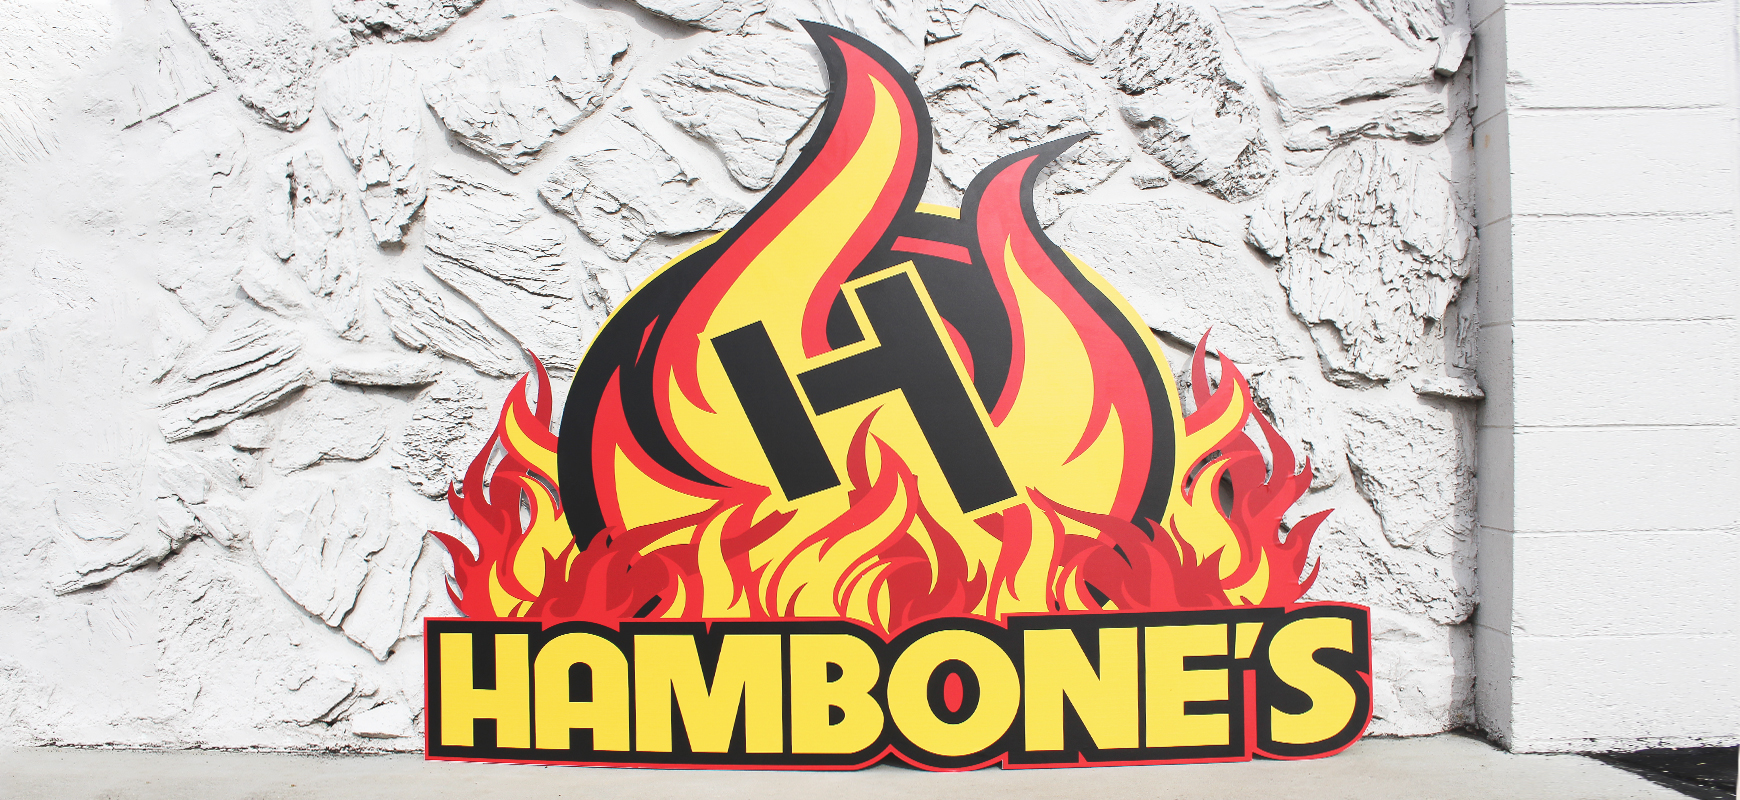 Hambone custom event signs with the brand name and fire logo made of opaque vinyl and PVC